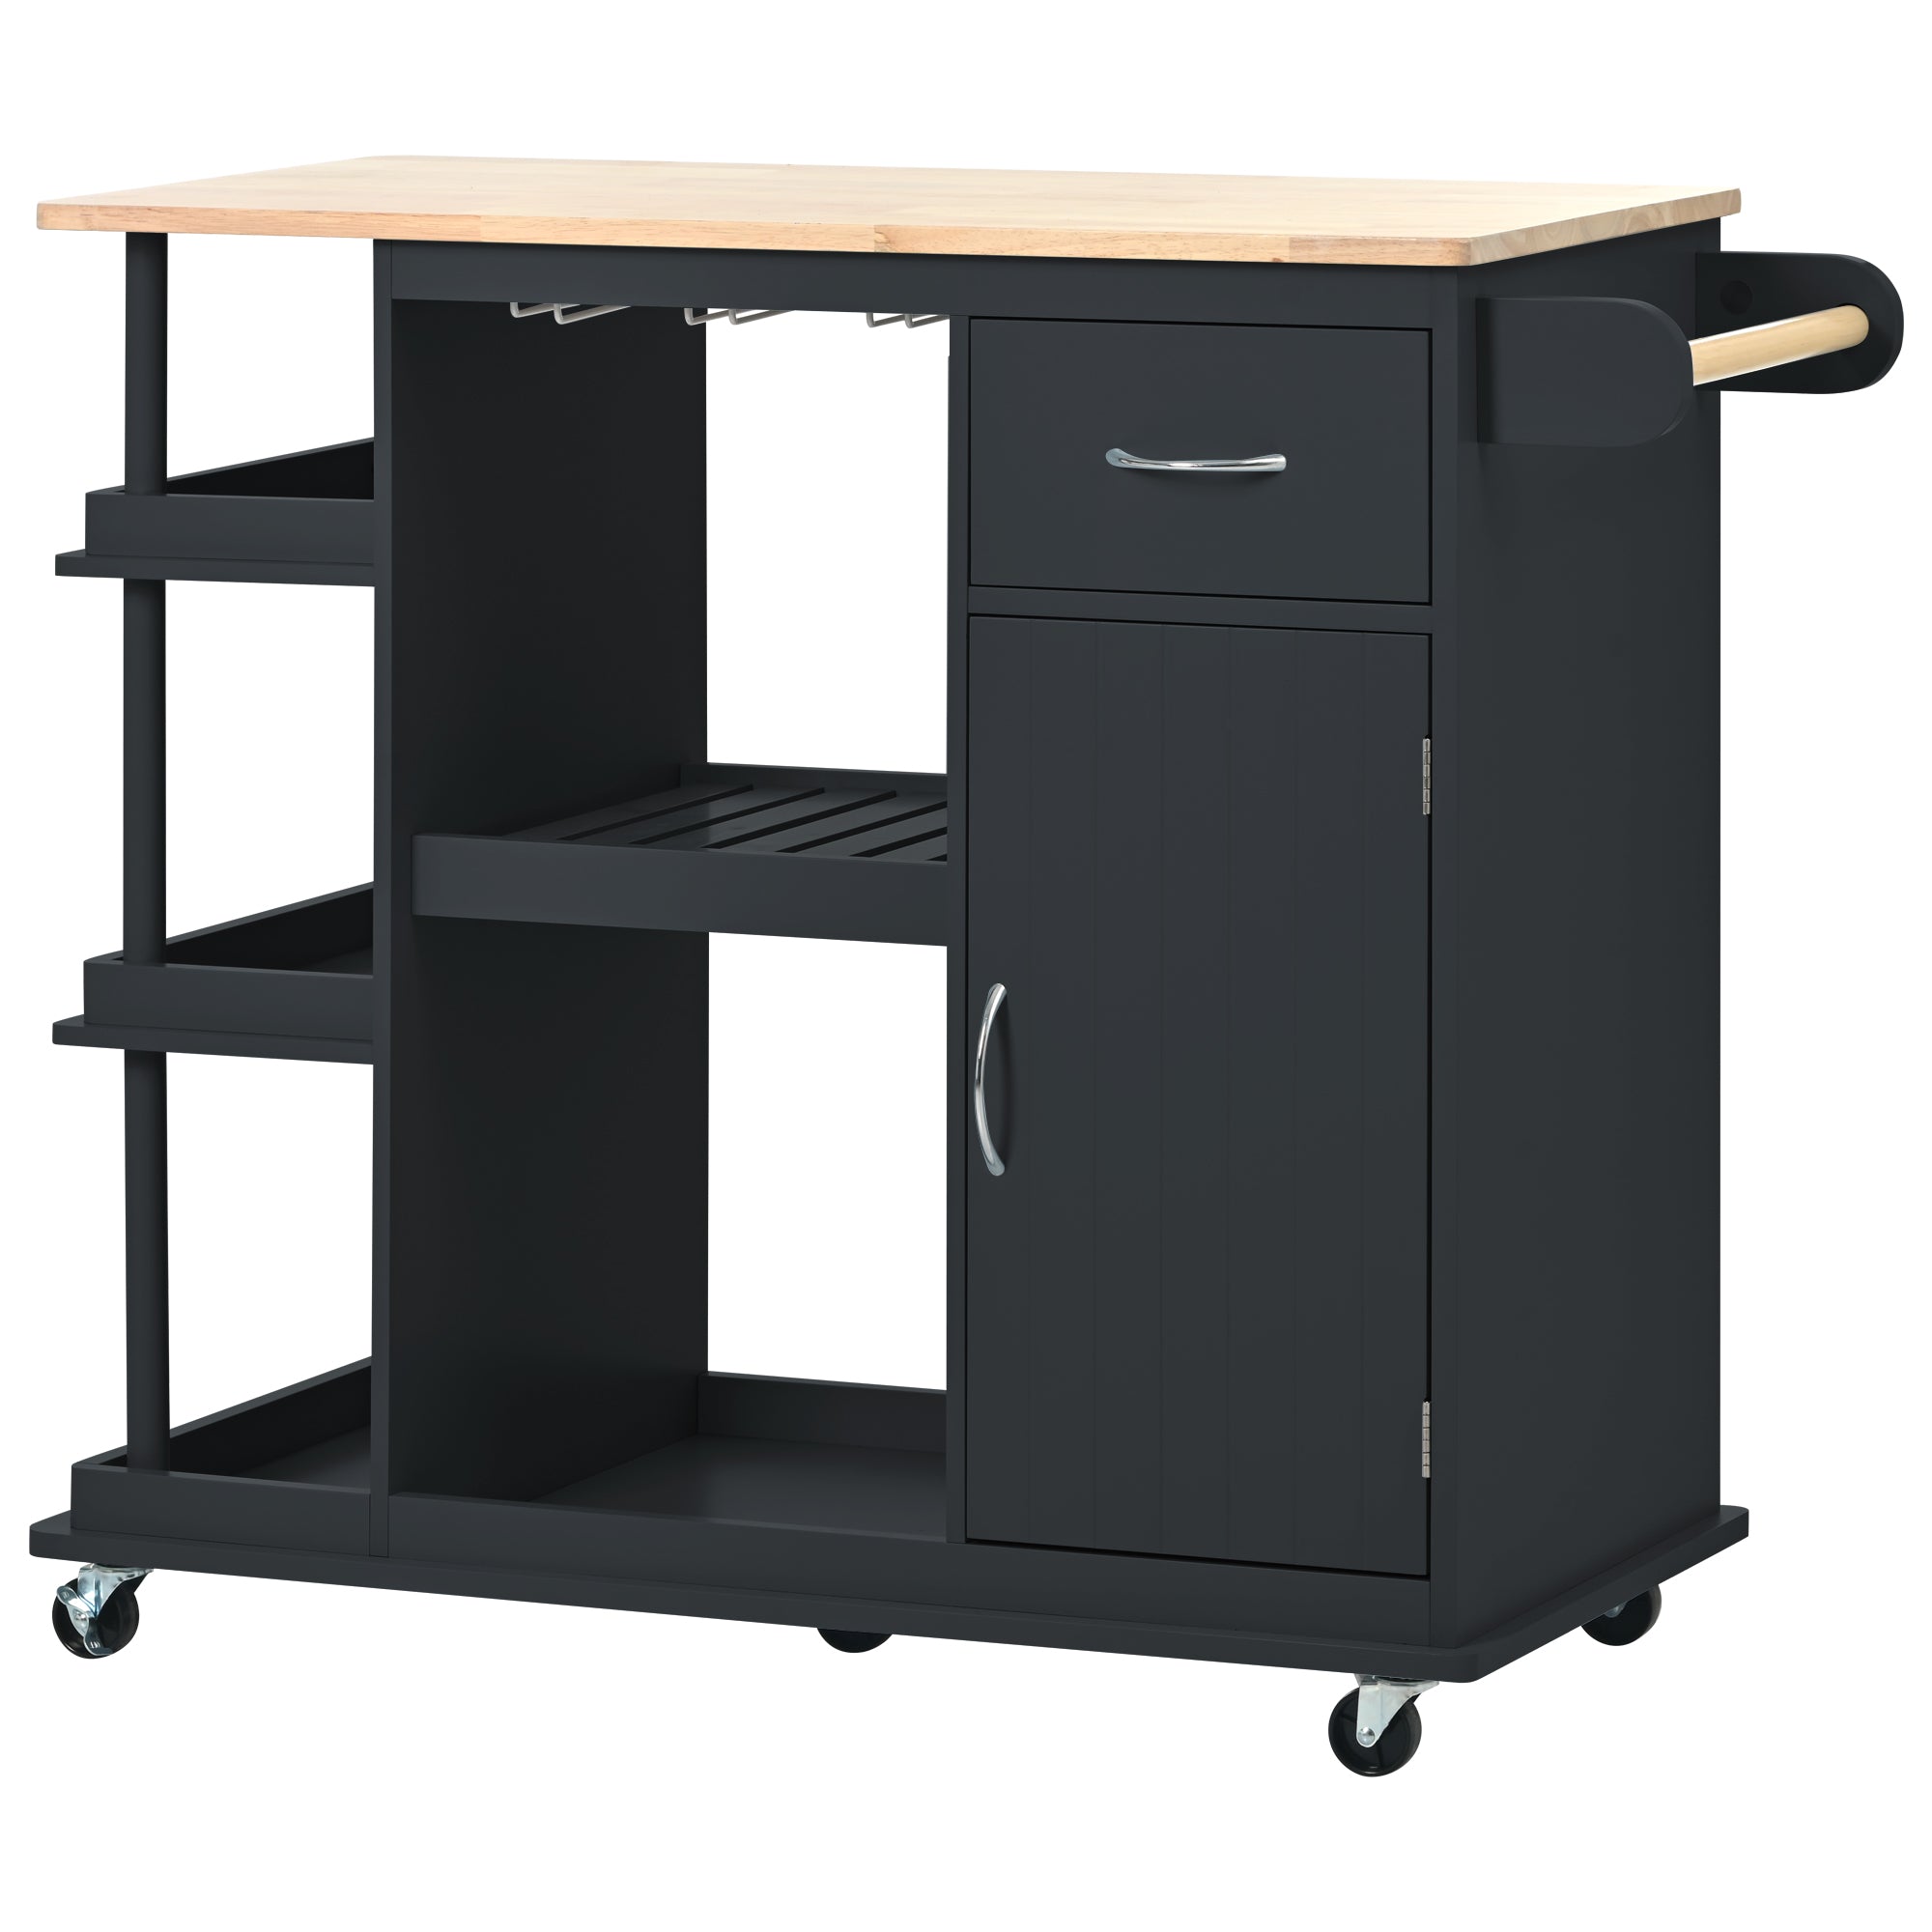 Kitchen Cart Cabinet with Adjustable Storage Shelves Rubber Wood Top with 5 Wheels